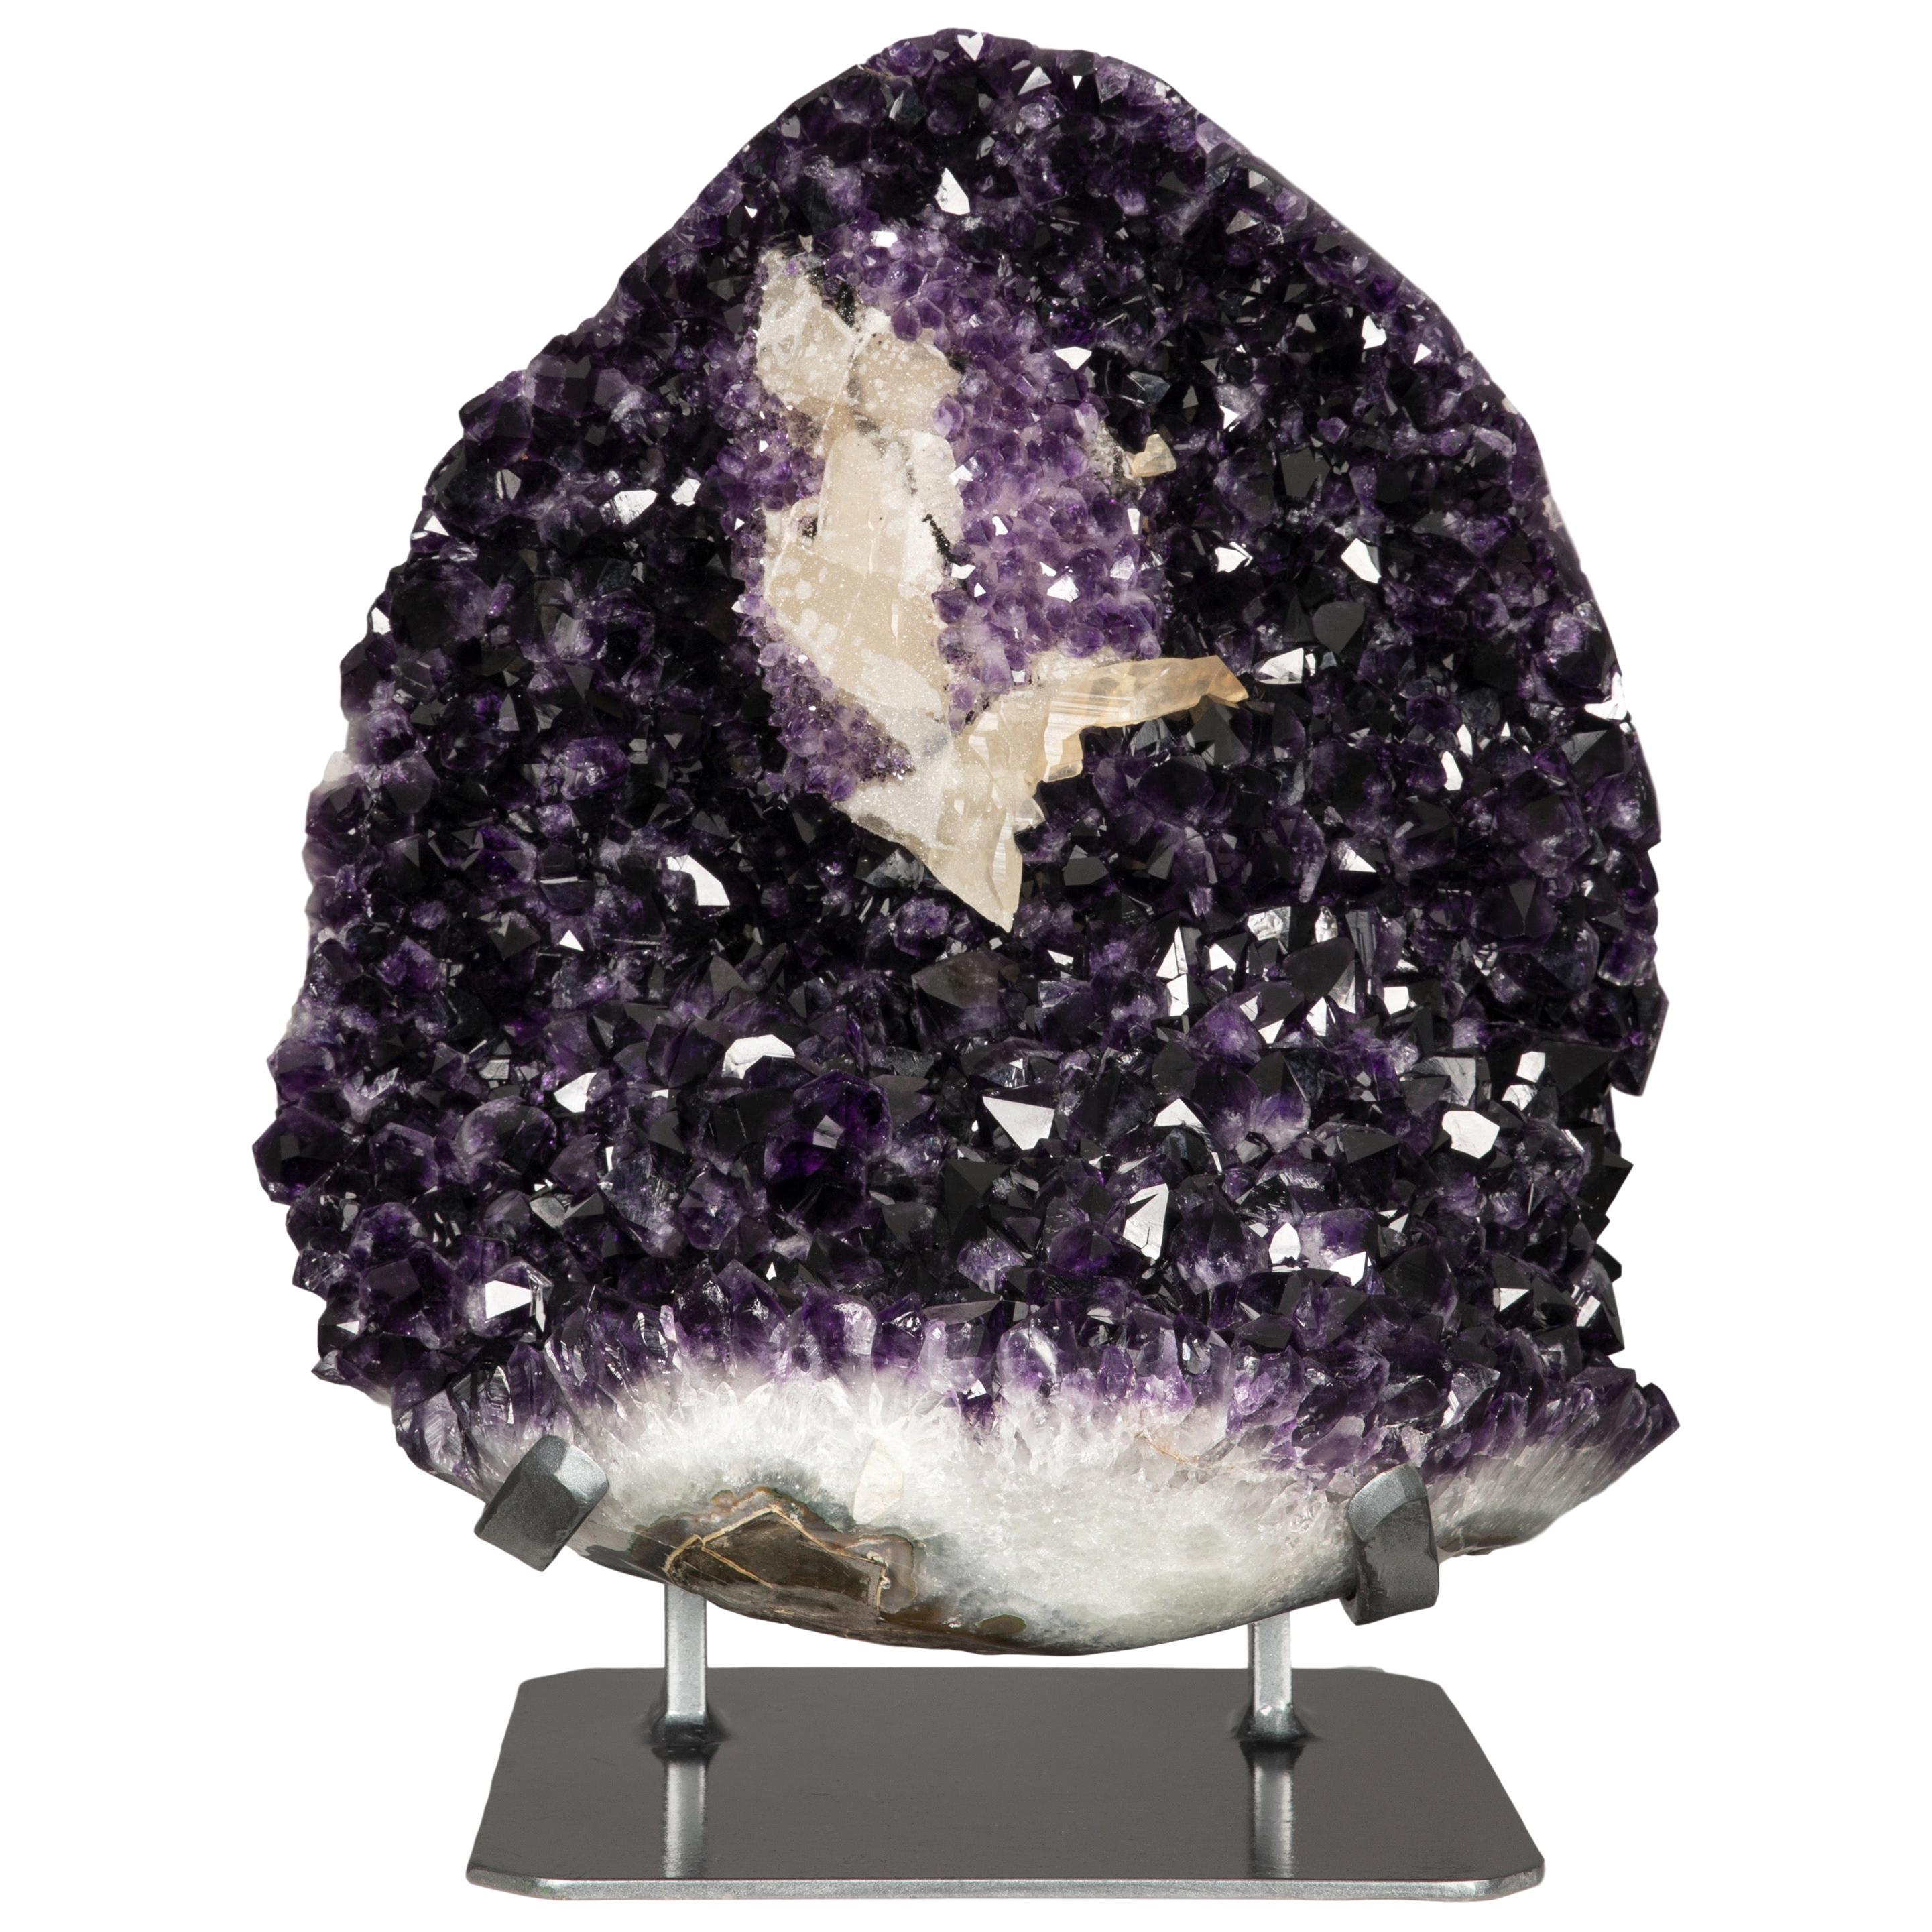 Large Amethyst Cluster with Calcite Formation, Hematite and White Quartz